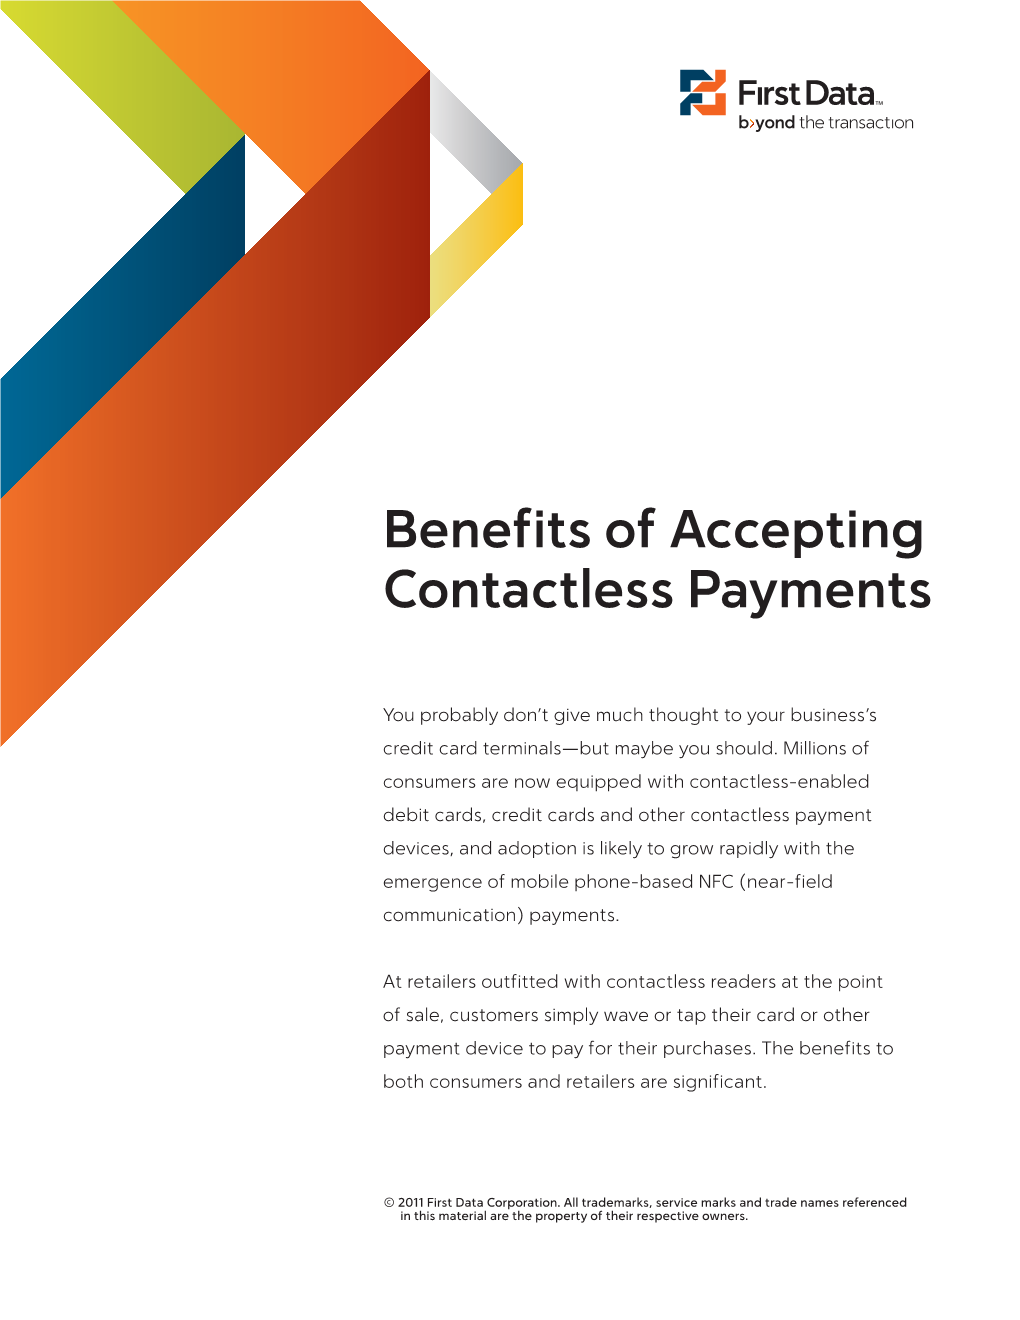 Benefits of Accepting Contactless Payments